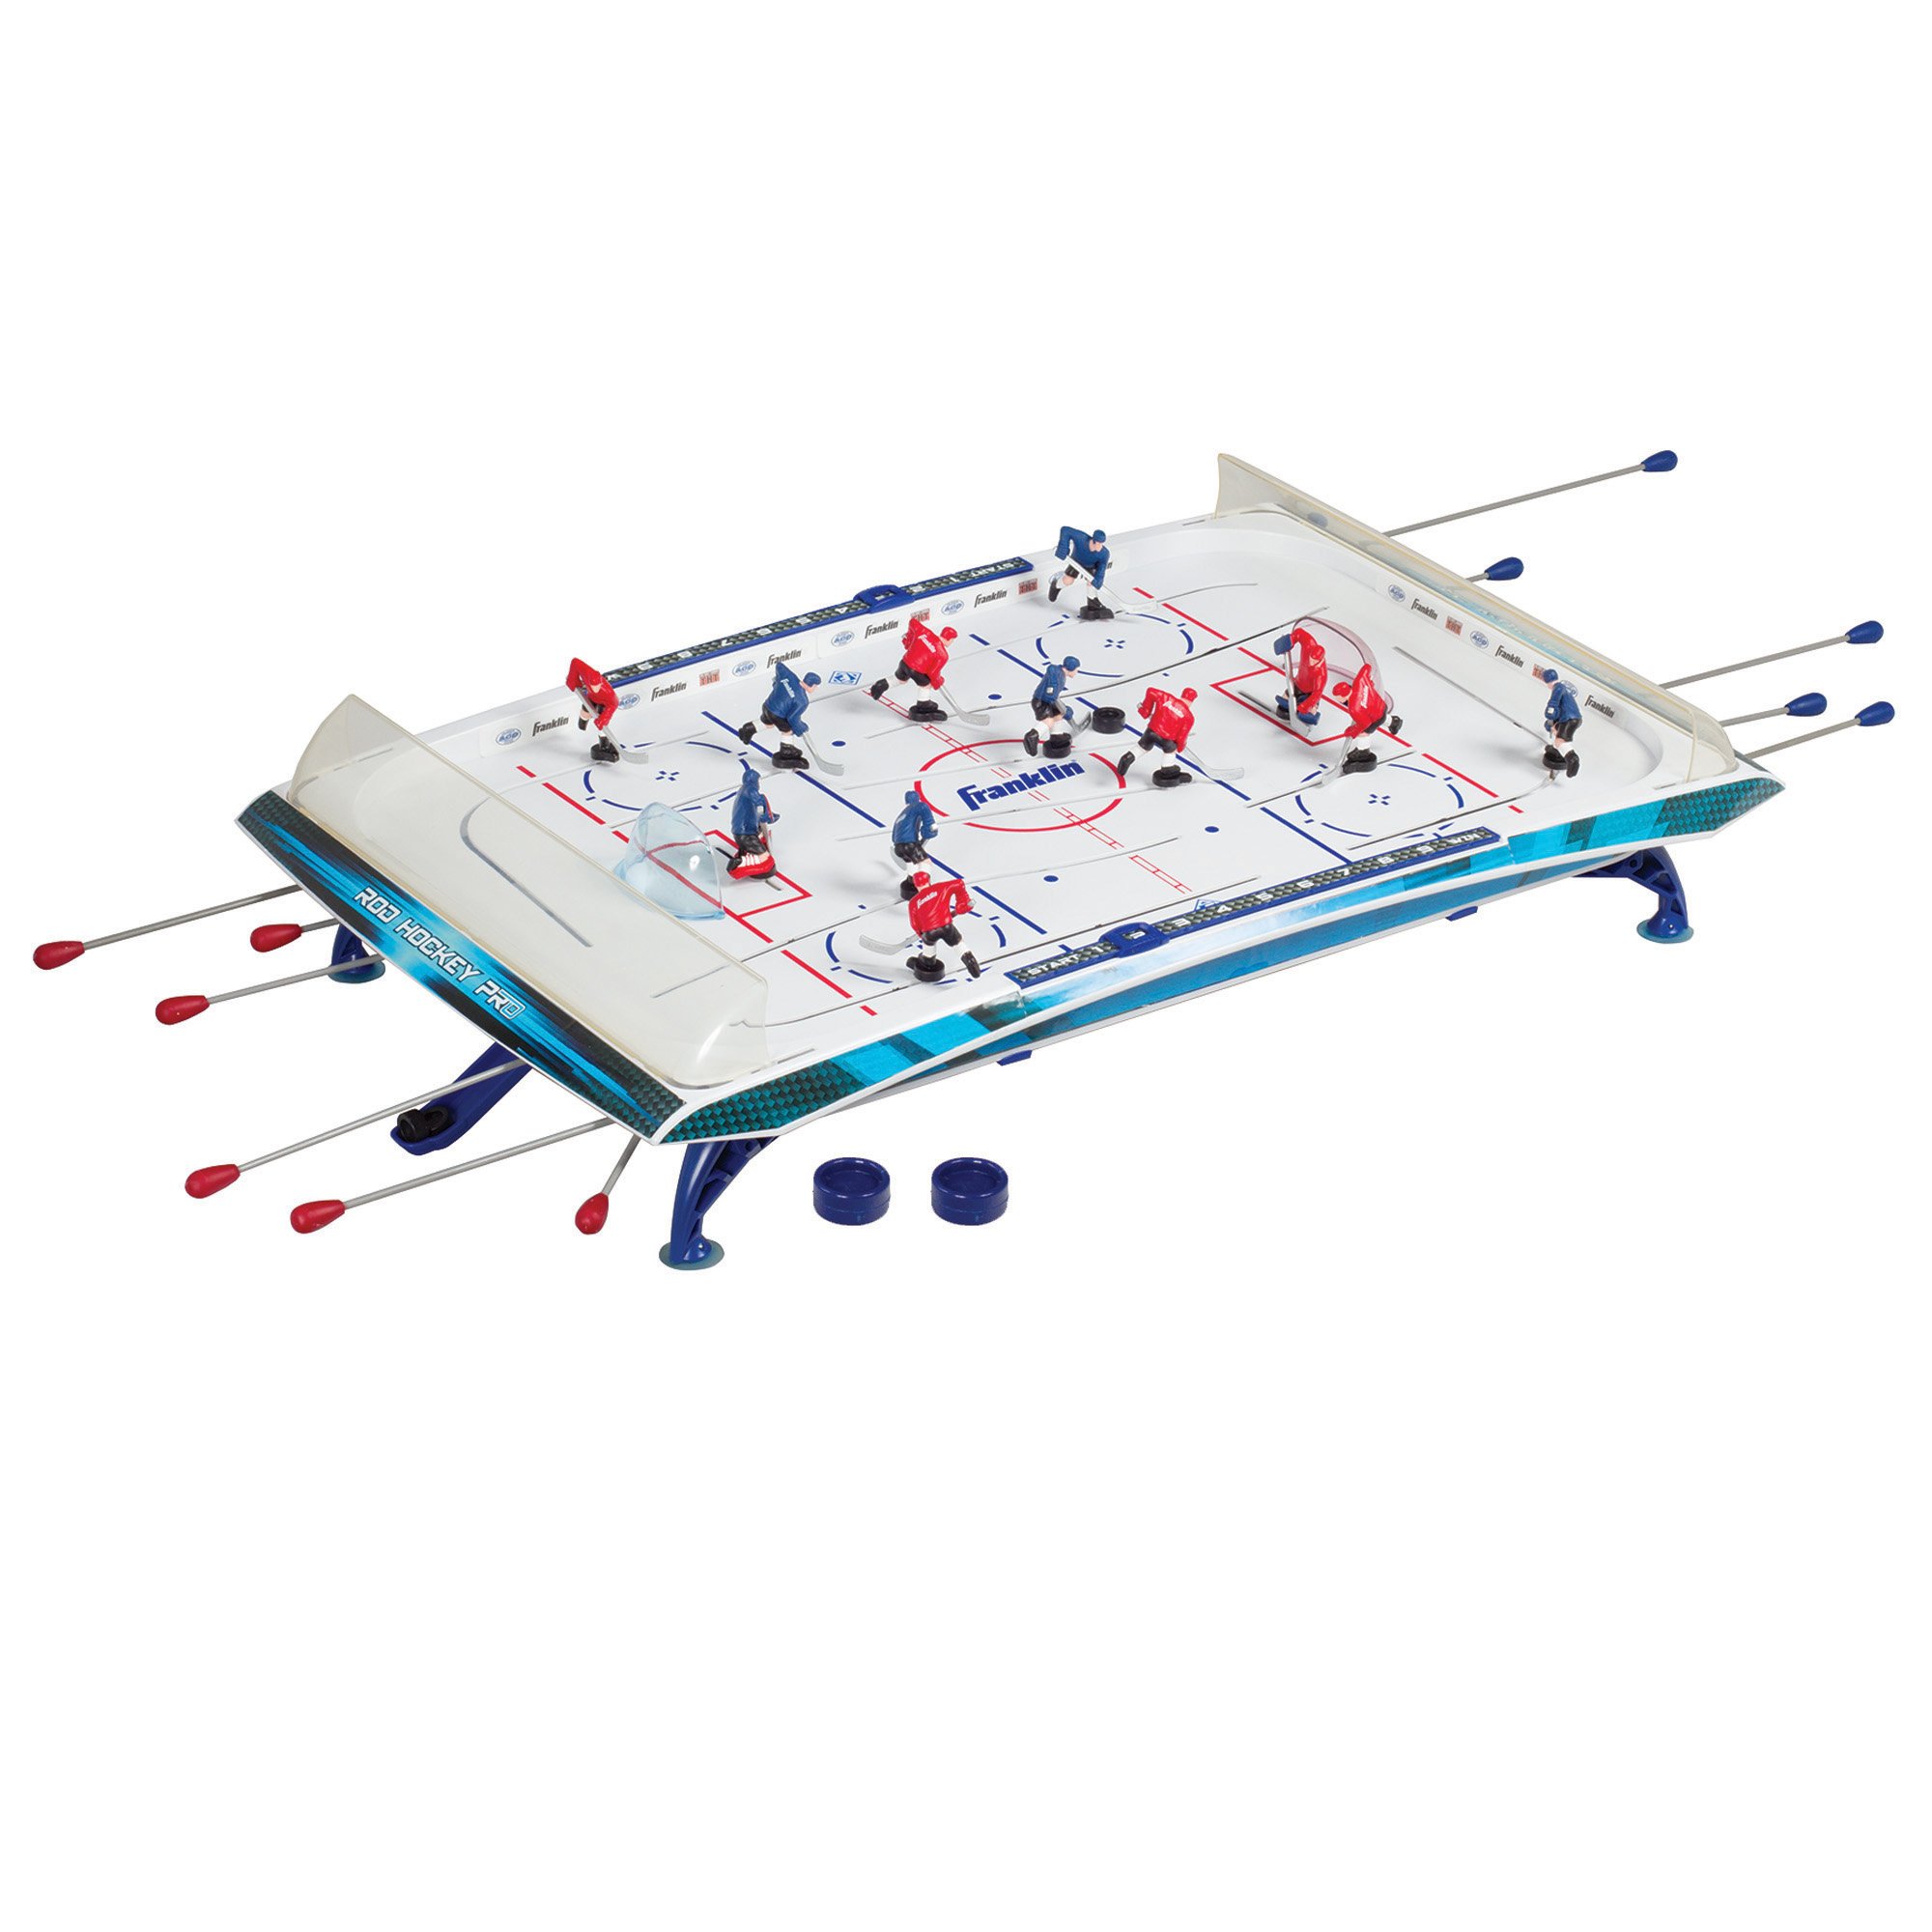 Franklin Sports Tabletop Rod Hockey Game - Gameroom Ice Hockey Table Game for Kids + Adults - Arcade Style Game Board + Mini Hockey Pucks Included